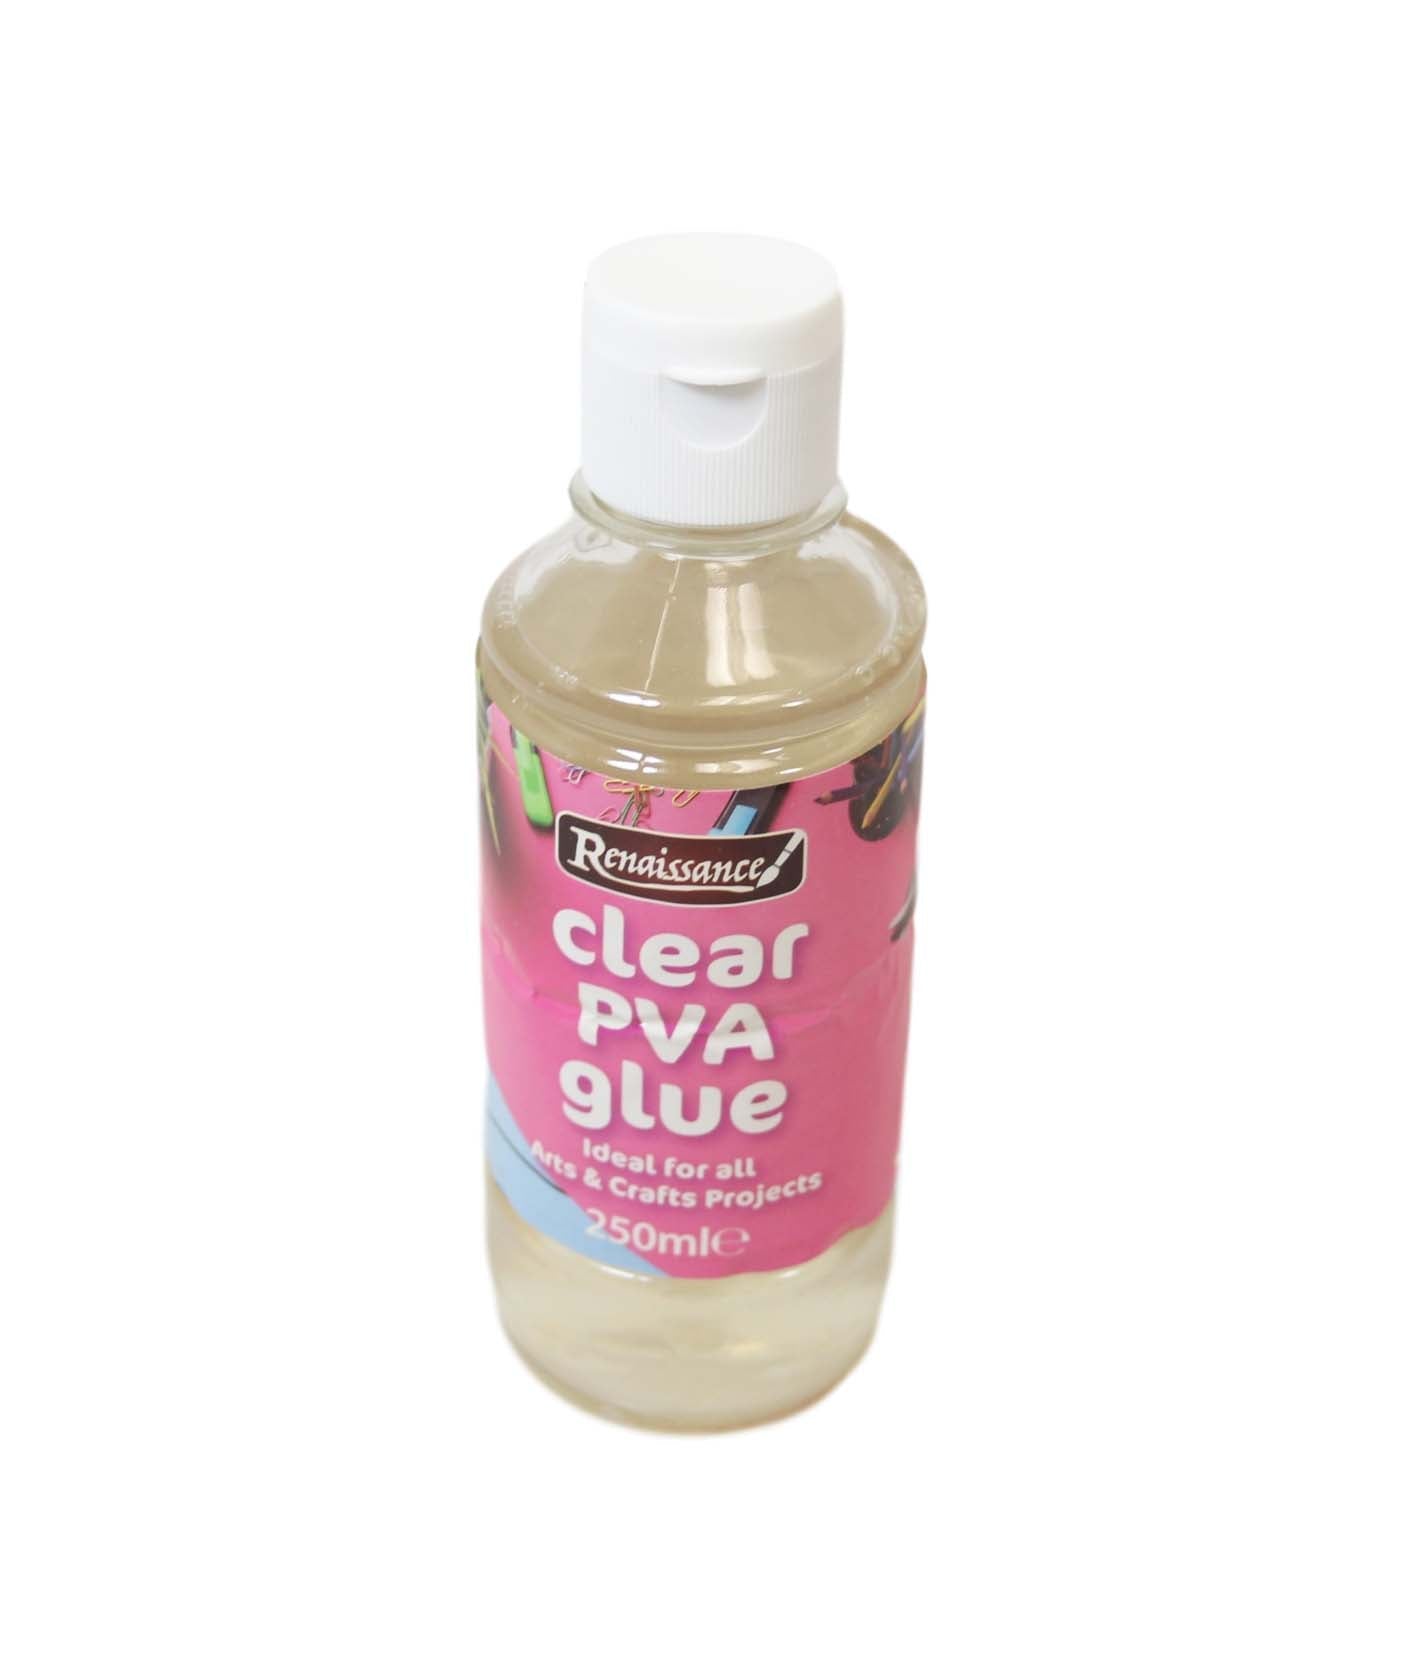 Clear PVA Glue Ideal For All Arts And Crafts Home School Sticking Glue 250ml 2937 (Parcel Rate)